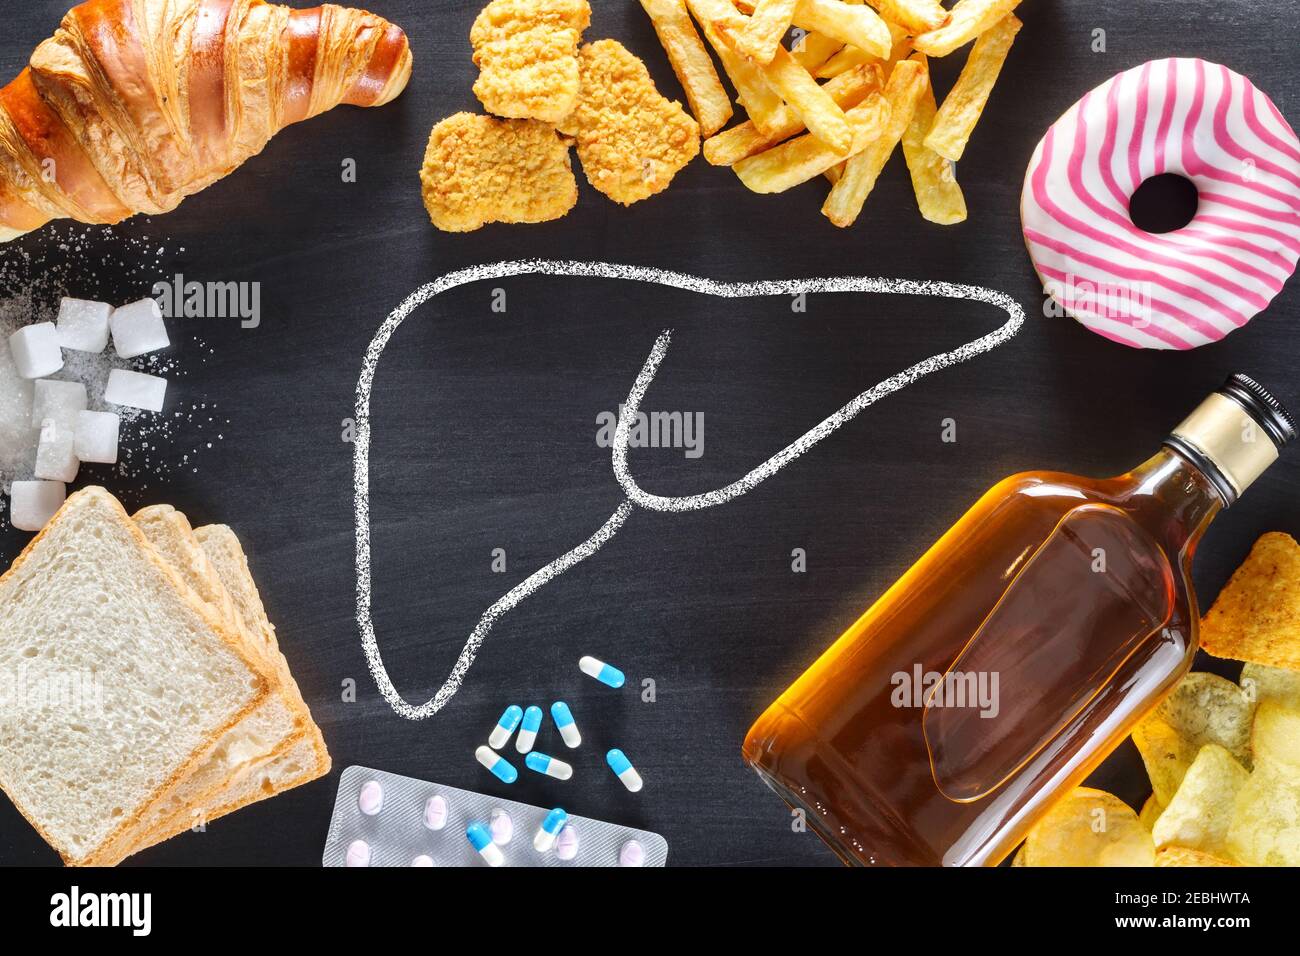 Unhealthy lifestyle - risk of liver damage. Top view Stock Photo